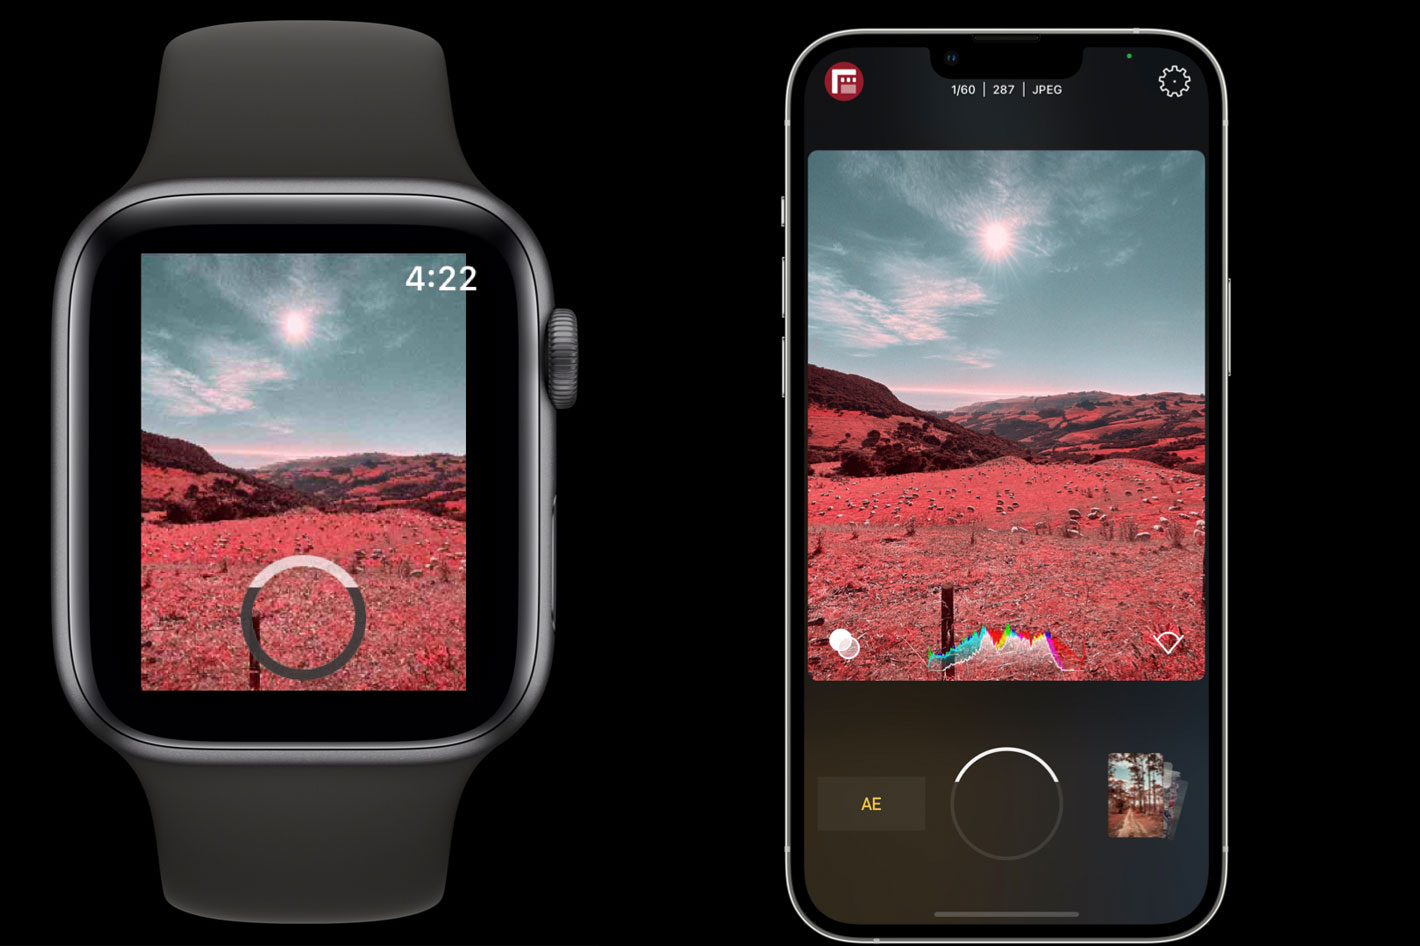 Filmic’s Firstlight for iOS adds support for Apple Watch